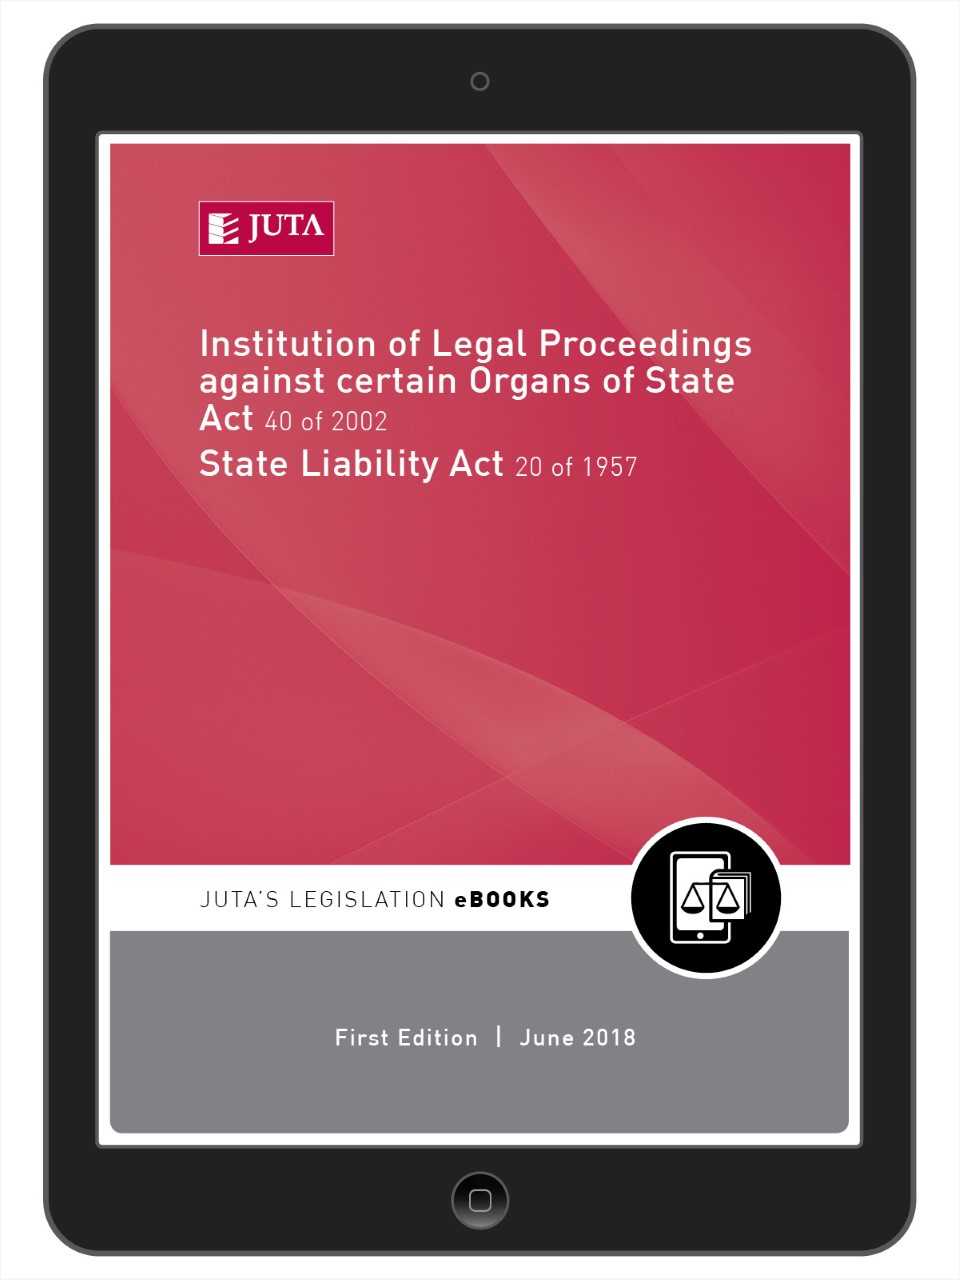 Institution of Legal Proceedings against certain Organs of State Act 40 of 2002; State Liability Act 20 of 1957